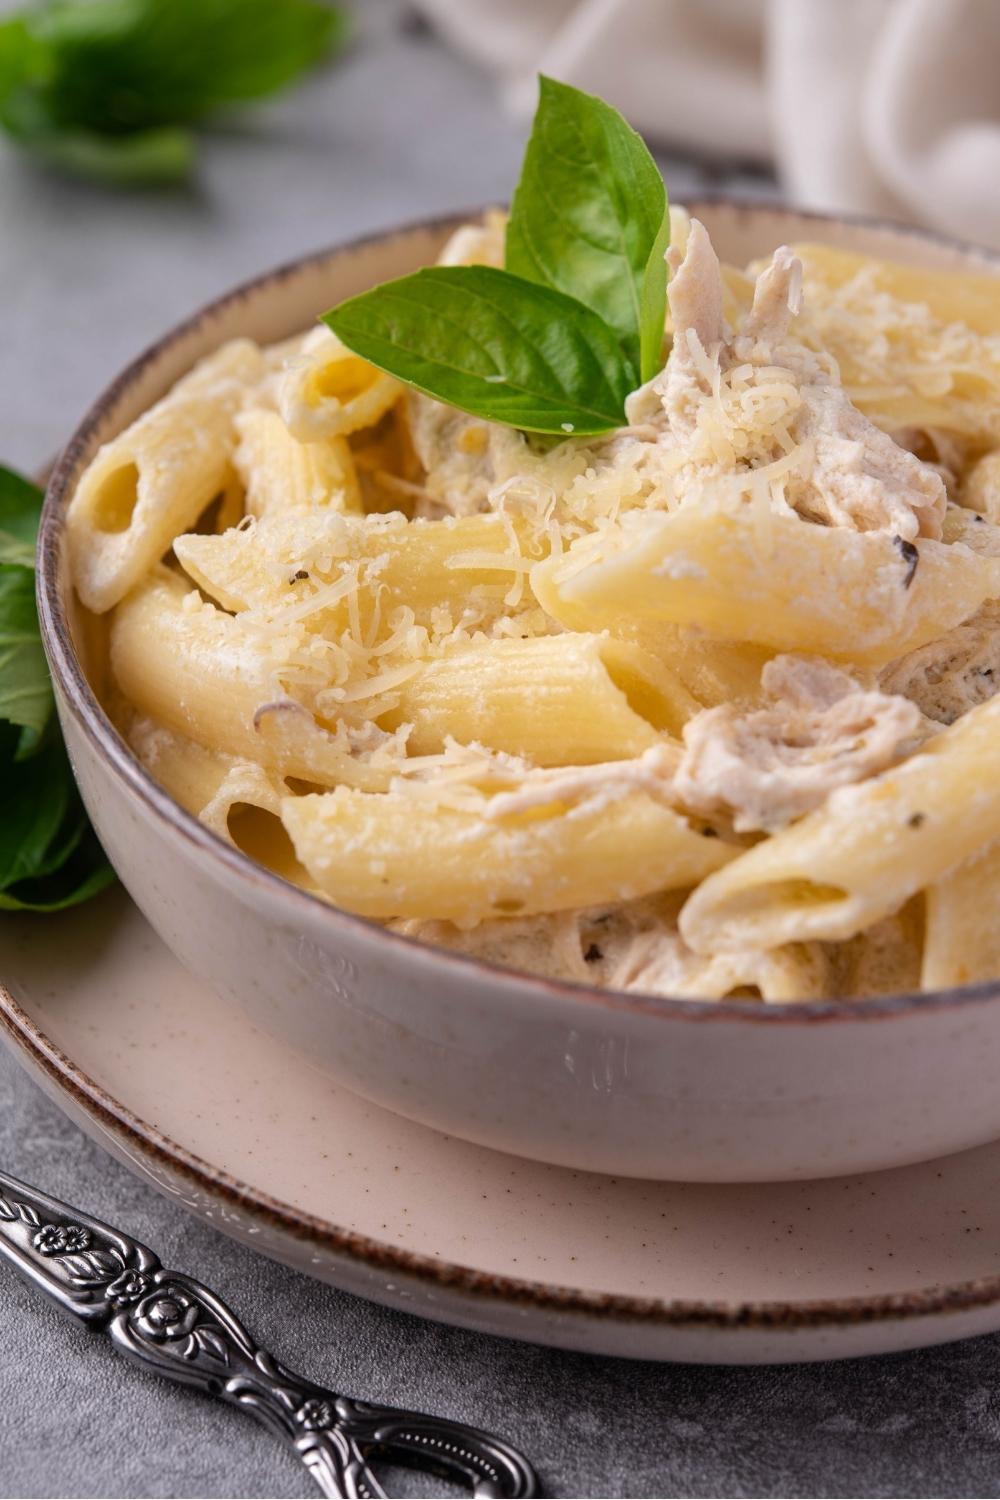 Olive Garden chicken pasta in a white bowl that is resting on a white plate. The pasta is garnished with basil leaves.